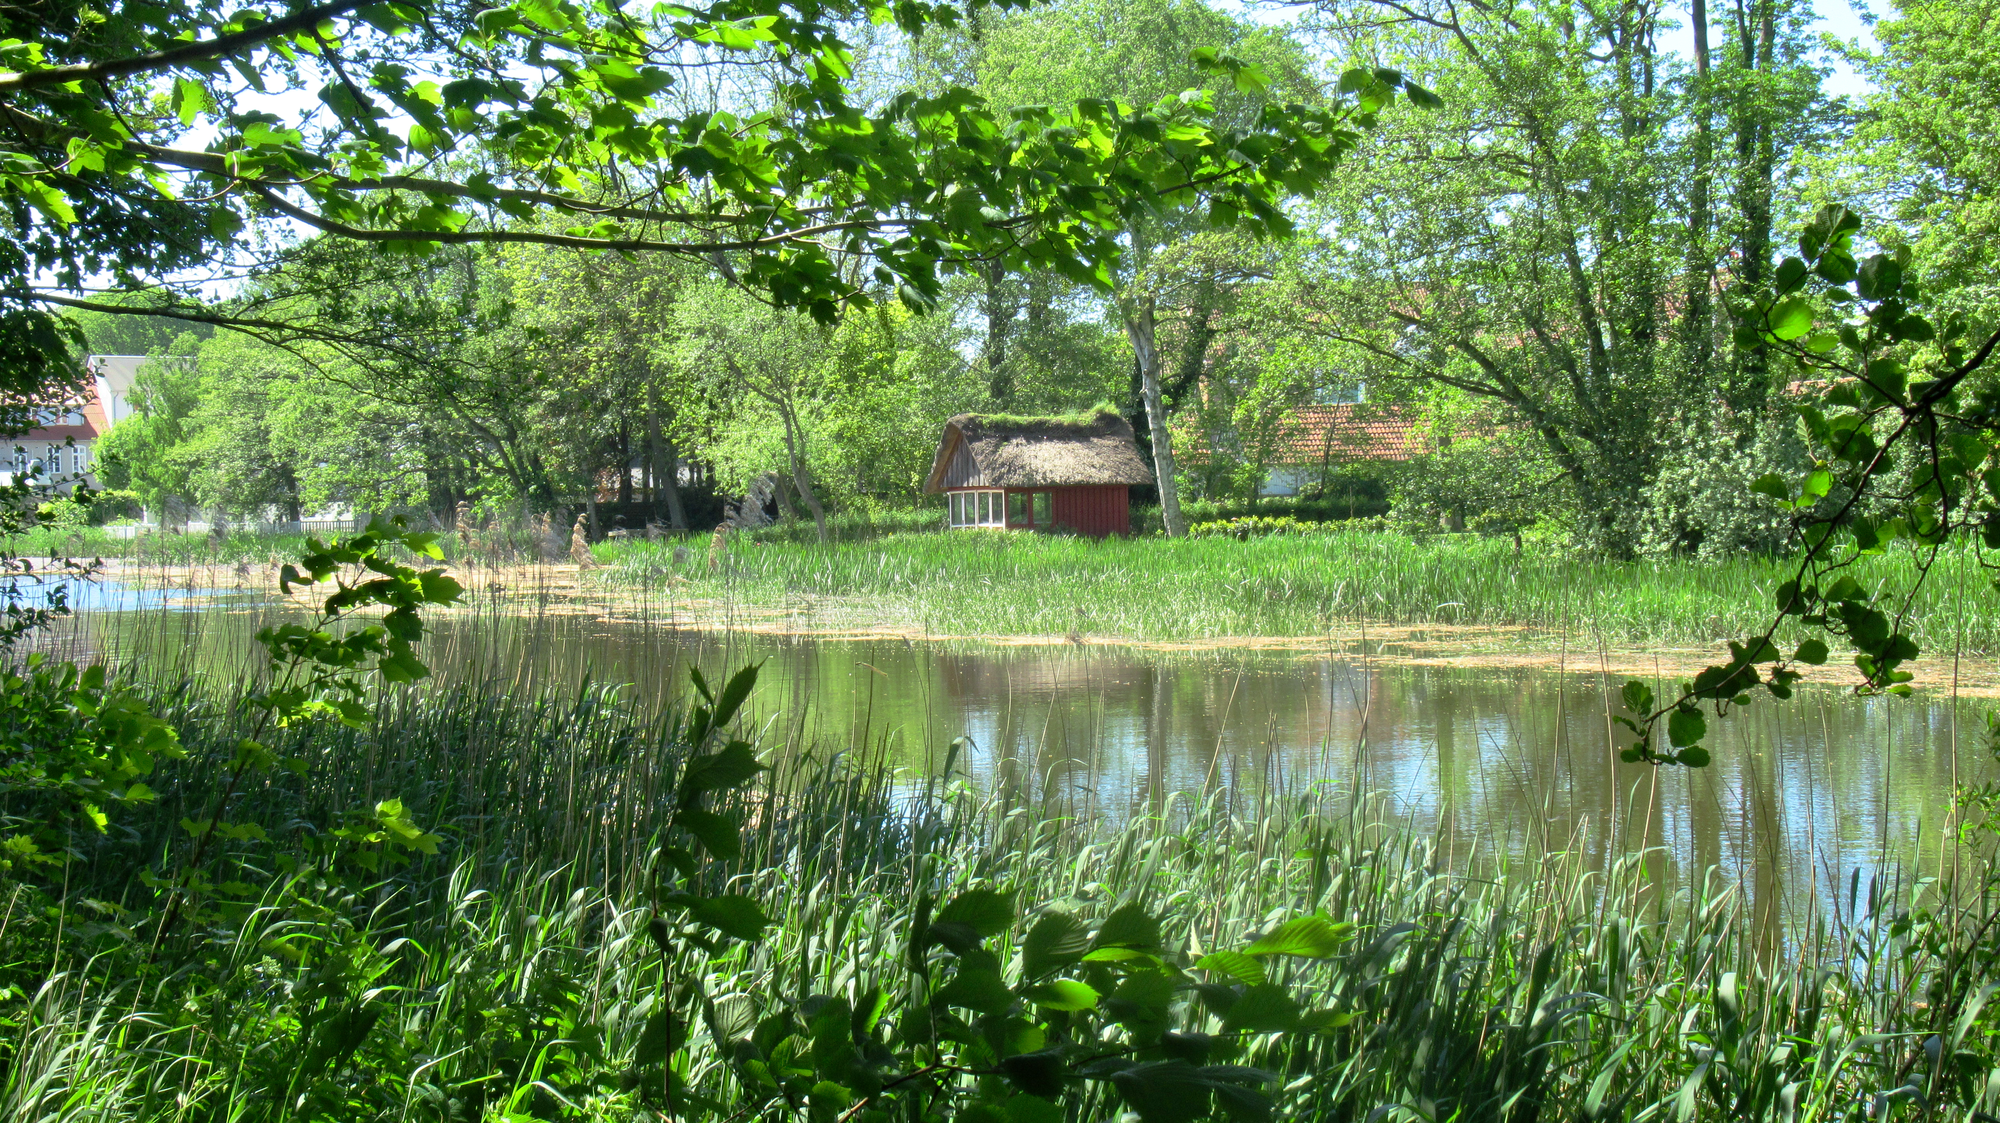 On the Vidå stream, a little boathouse has a characteristic thatched hay roof.